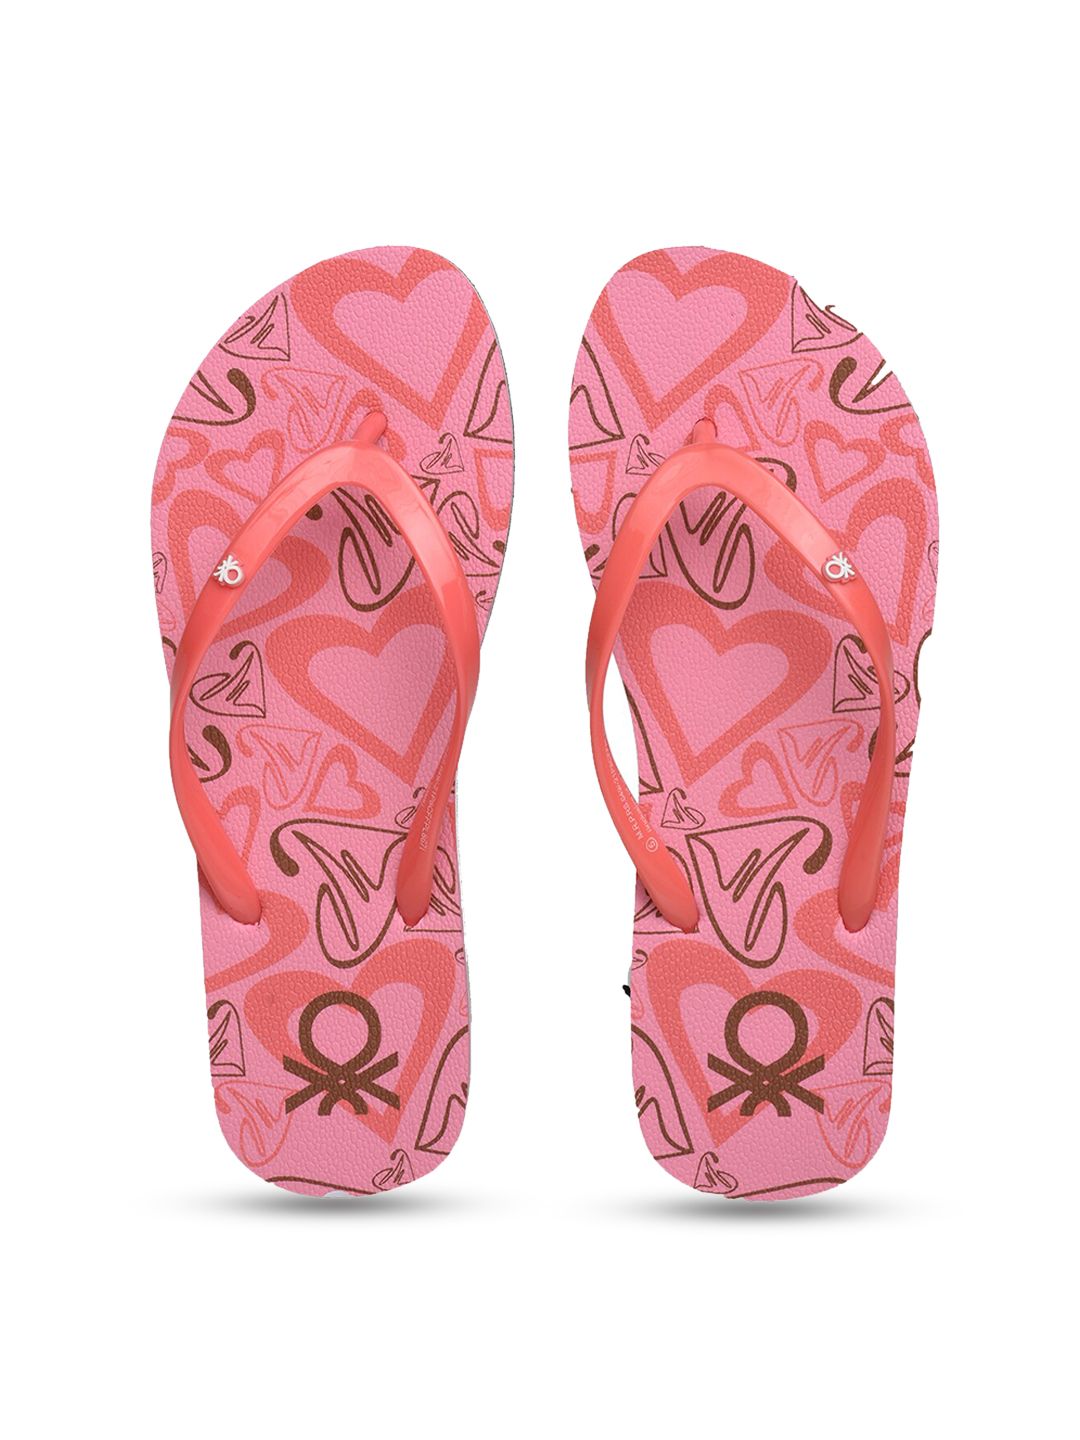 United Colors of Benetton Women Coral & White Printed Rubber Thong Flip-Flops Price in India